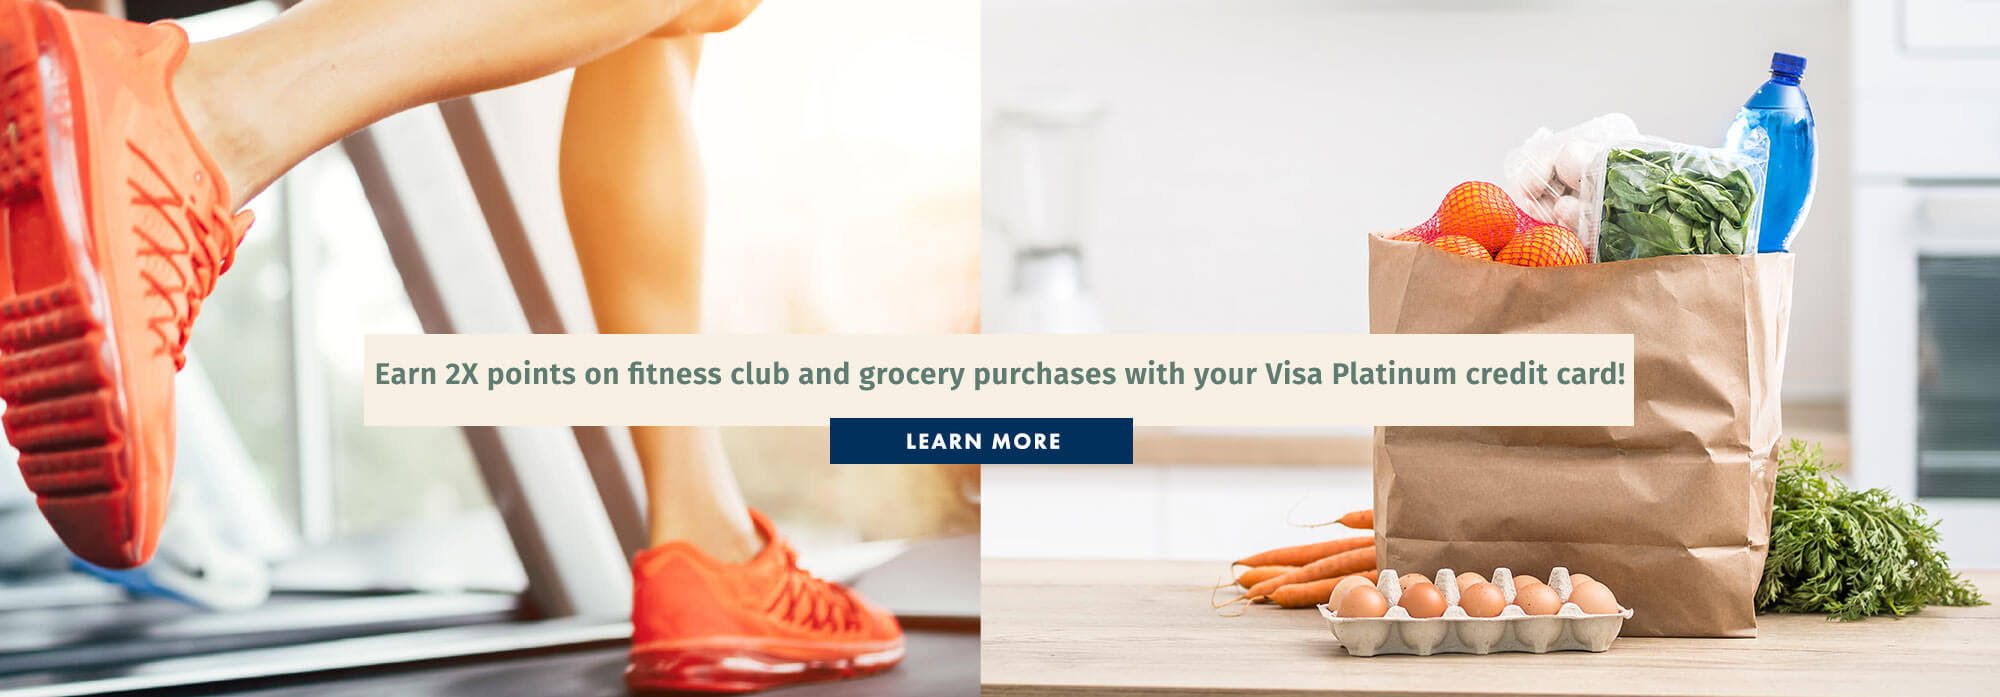 Earn 2X points on fitness club and grocery purchases with your Visa Platinum credit card!